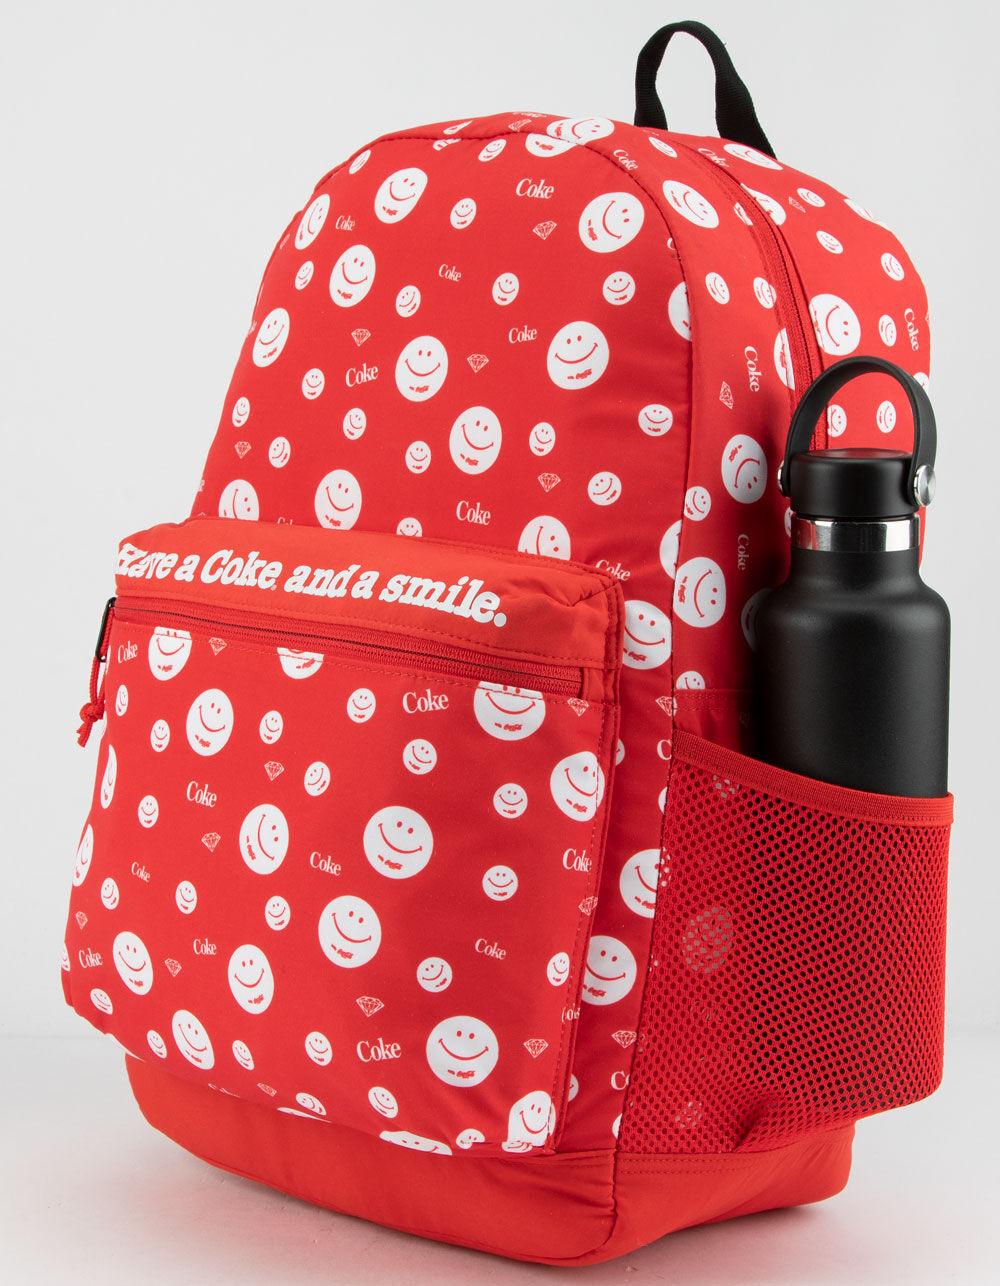 DIAMOND SUPPLY CO. x Coca-Cola Smiley Red Backpack image number 1